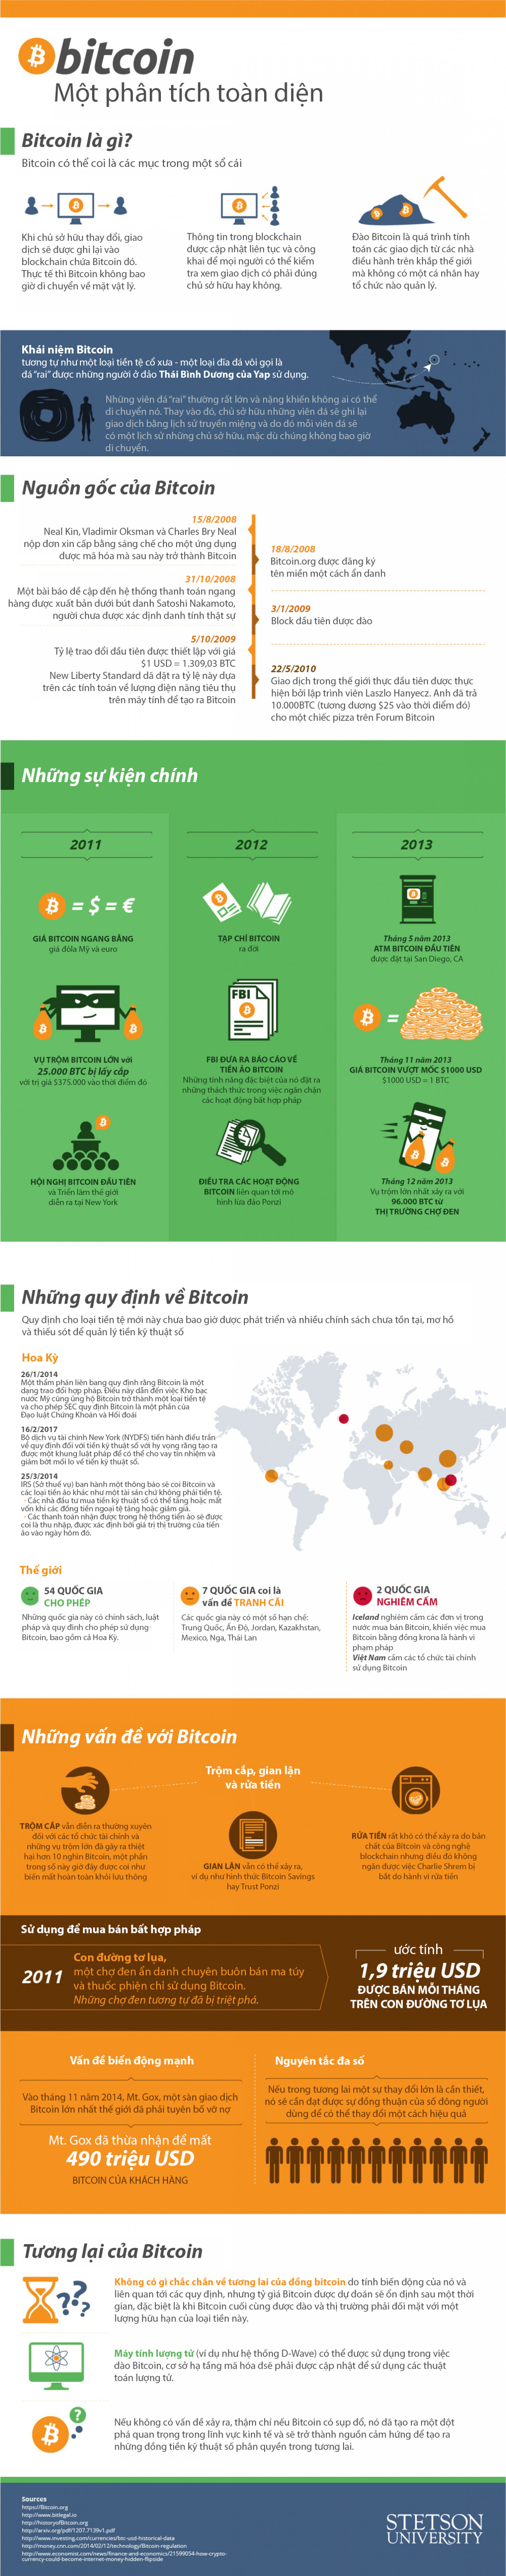 bitcoin-past-present-and-future-infographic